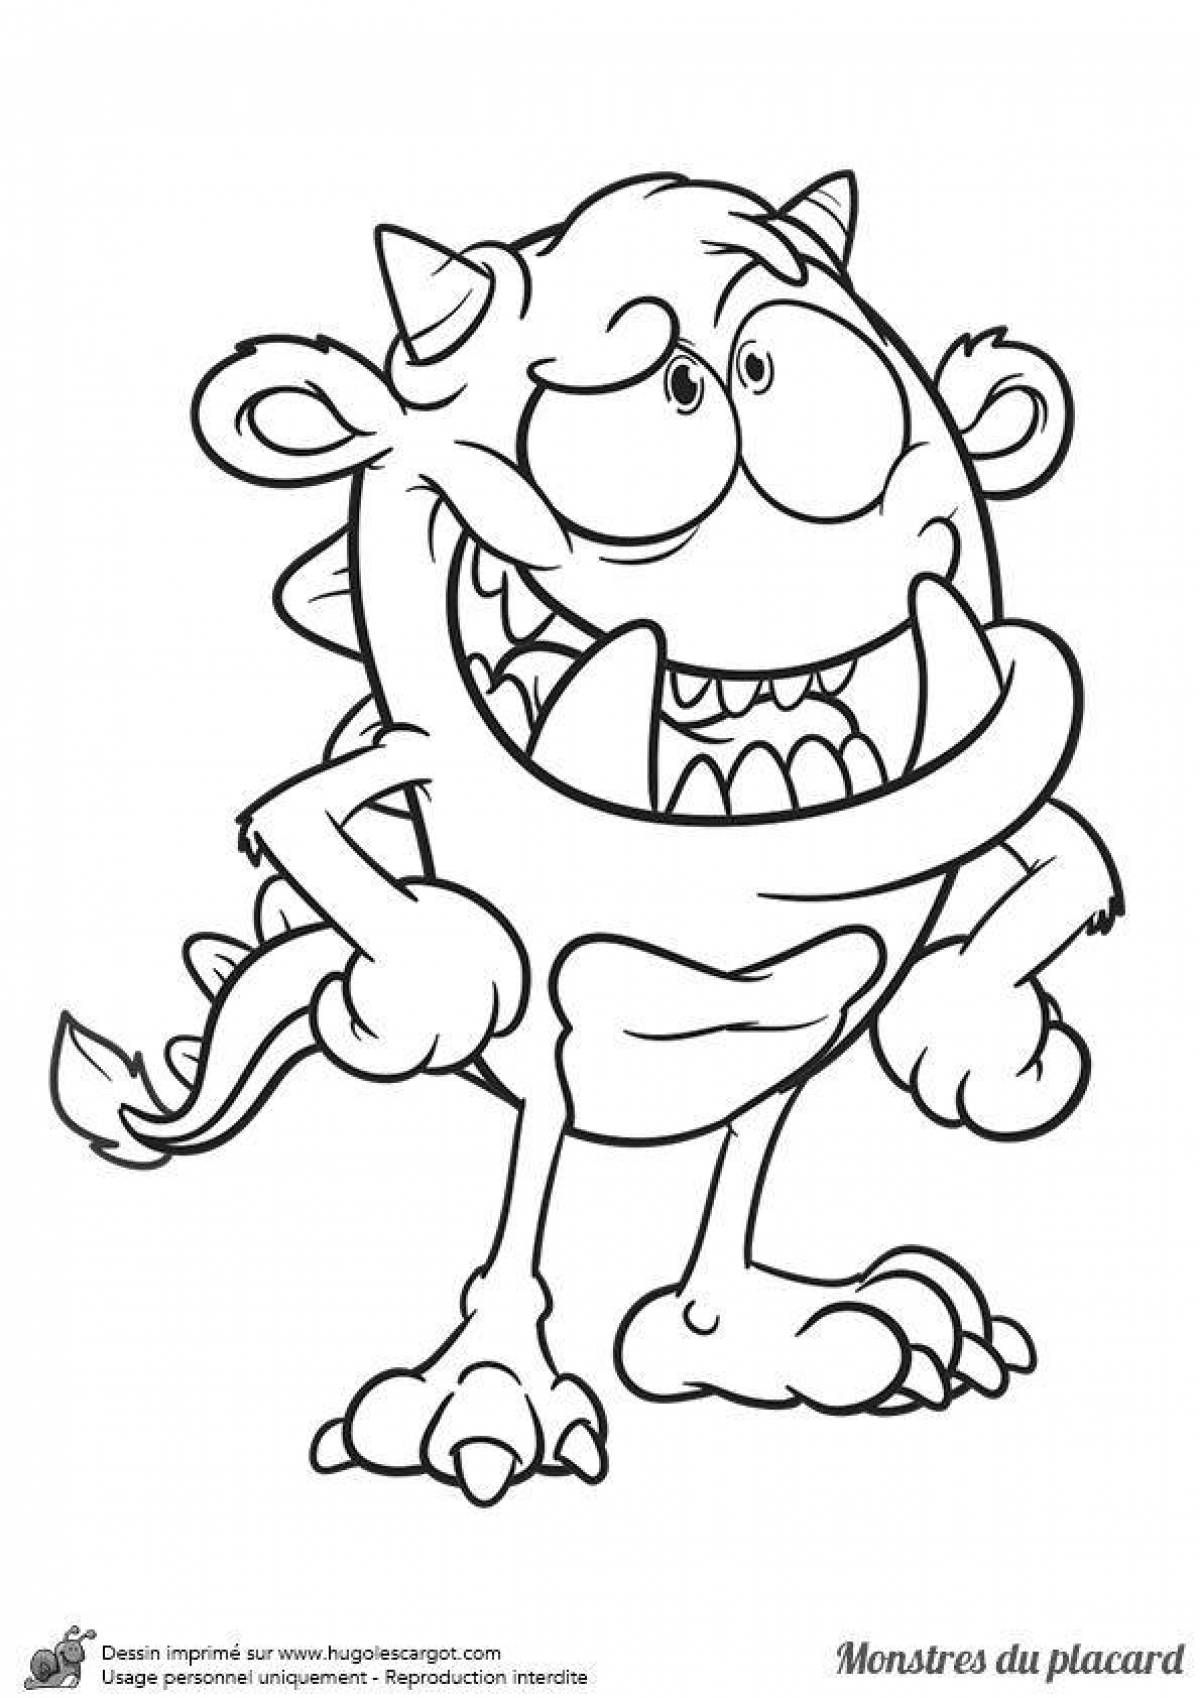 Cute monsters coloring pages for kids